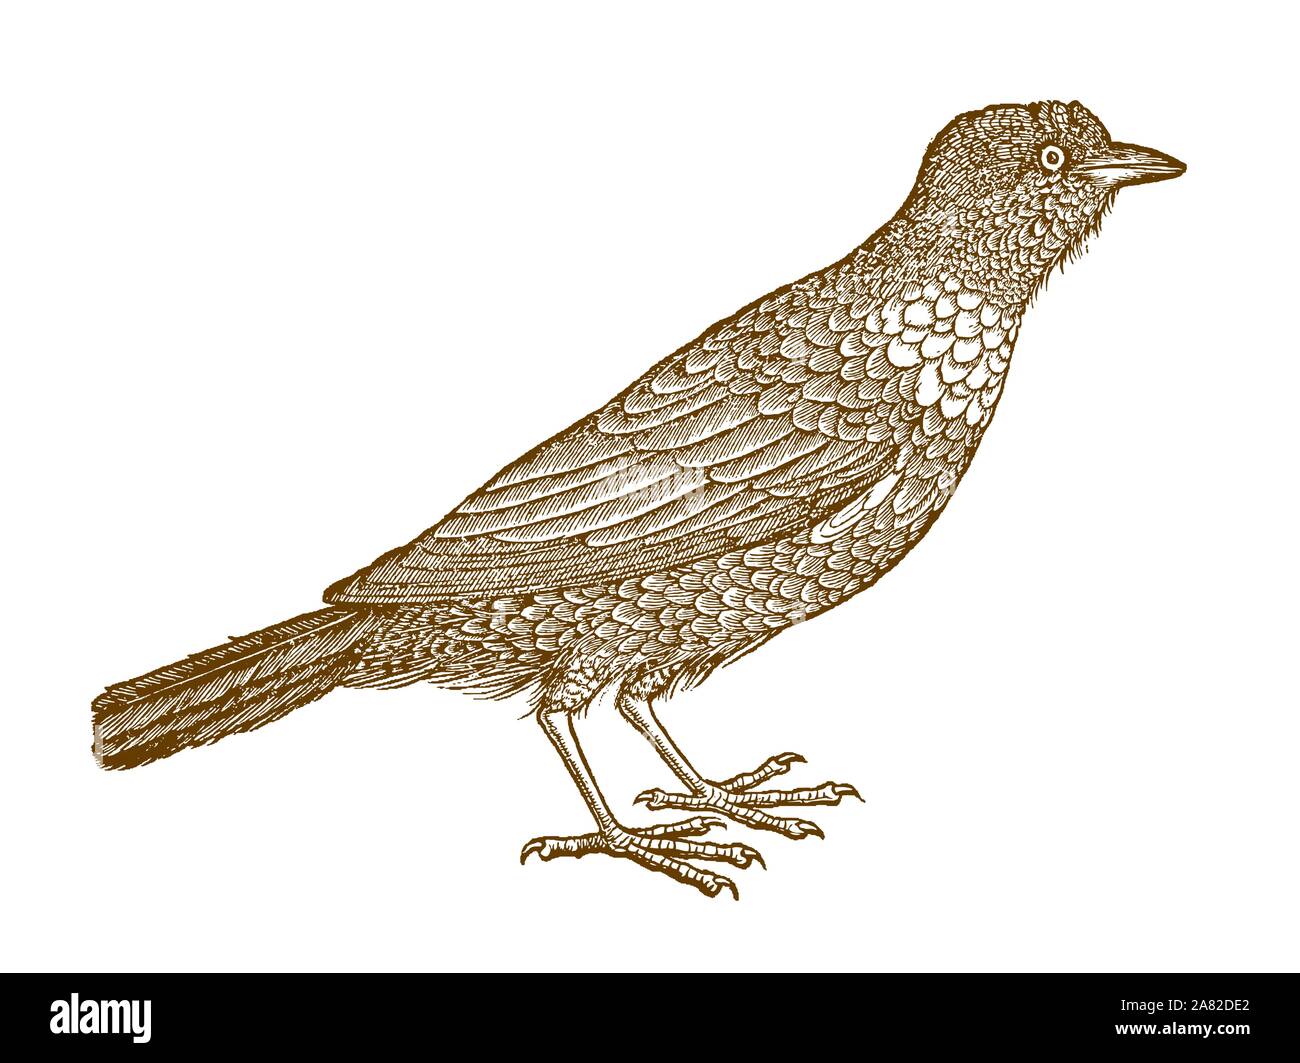 Ring ouzel (turdus torquatus) in side view. Illustration after a historic woodcut from the 16th century Stock Vector